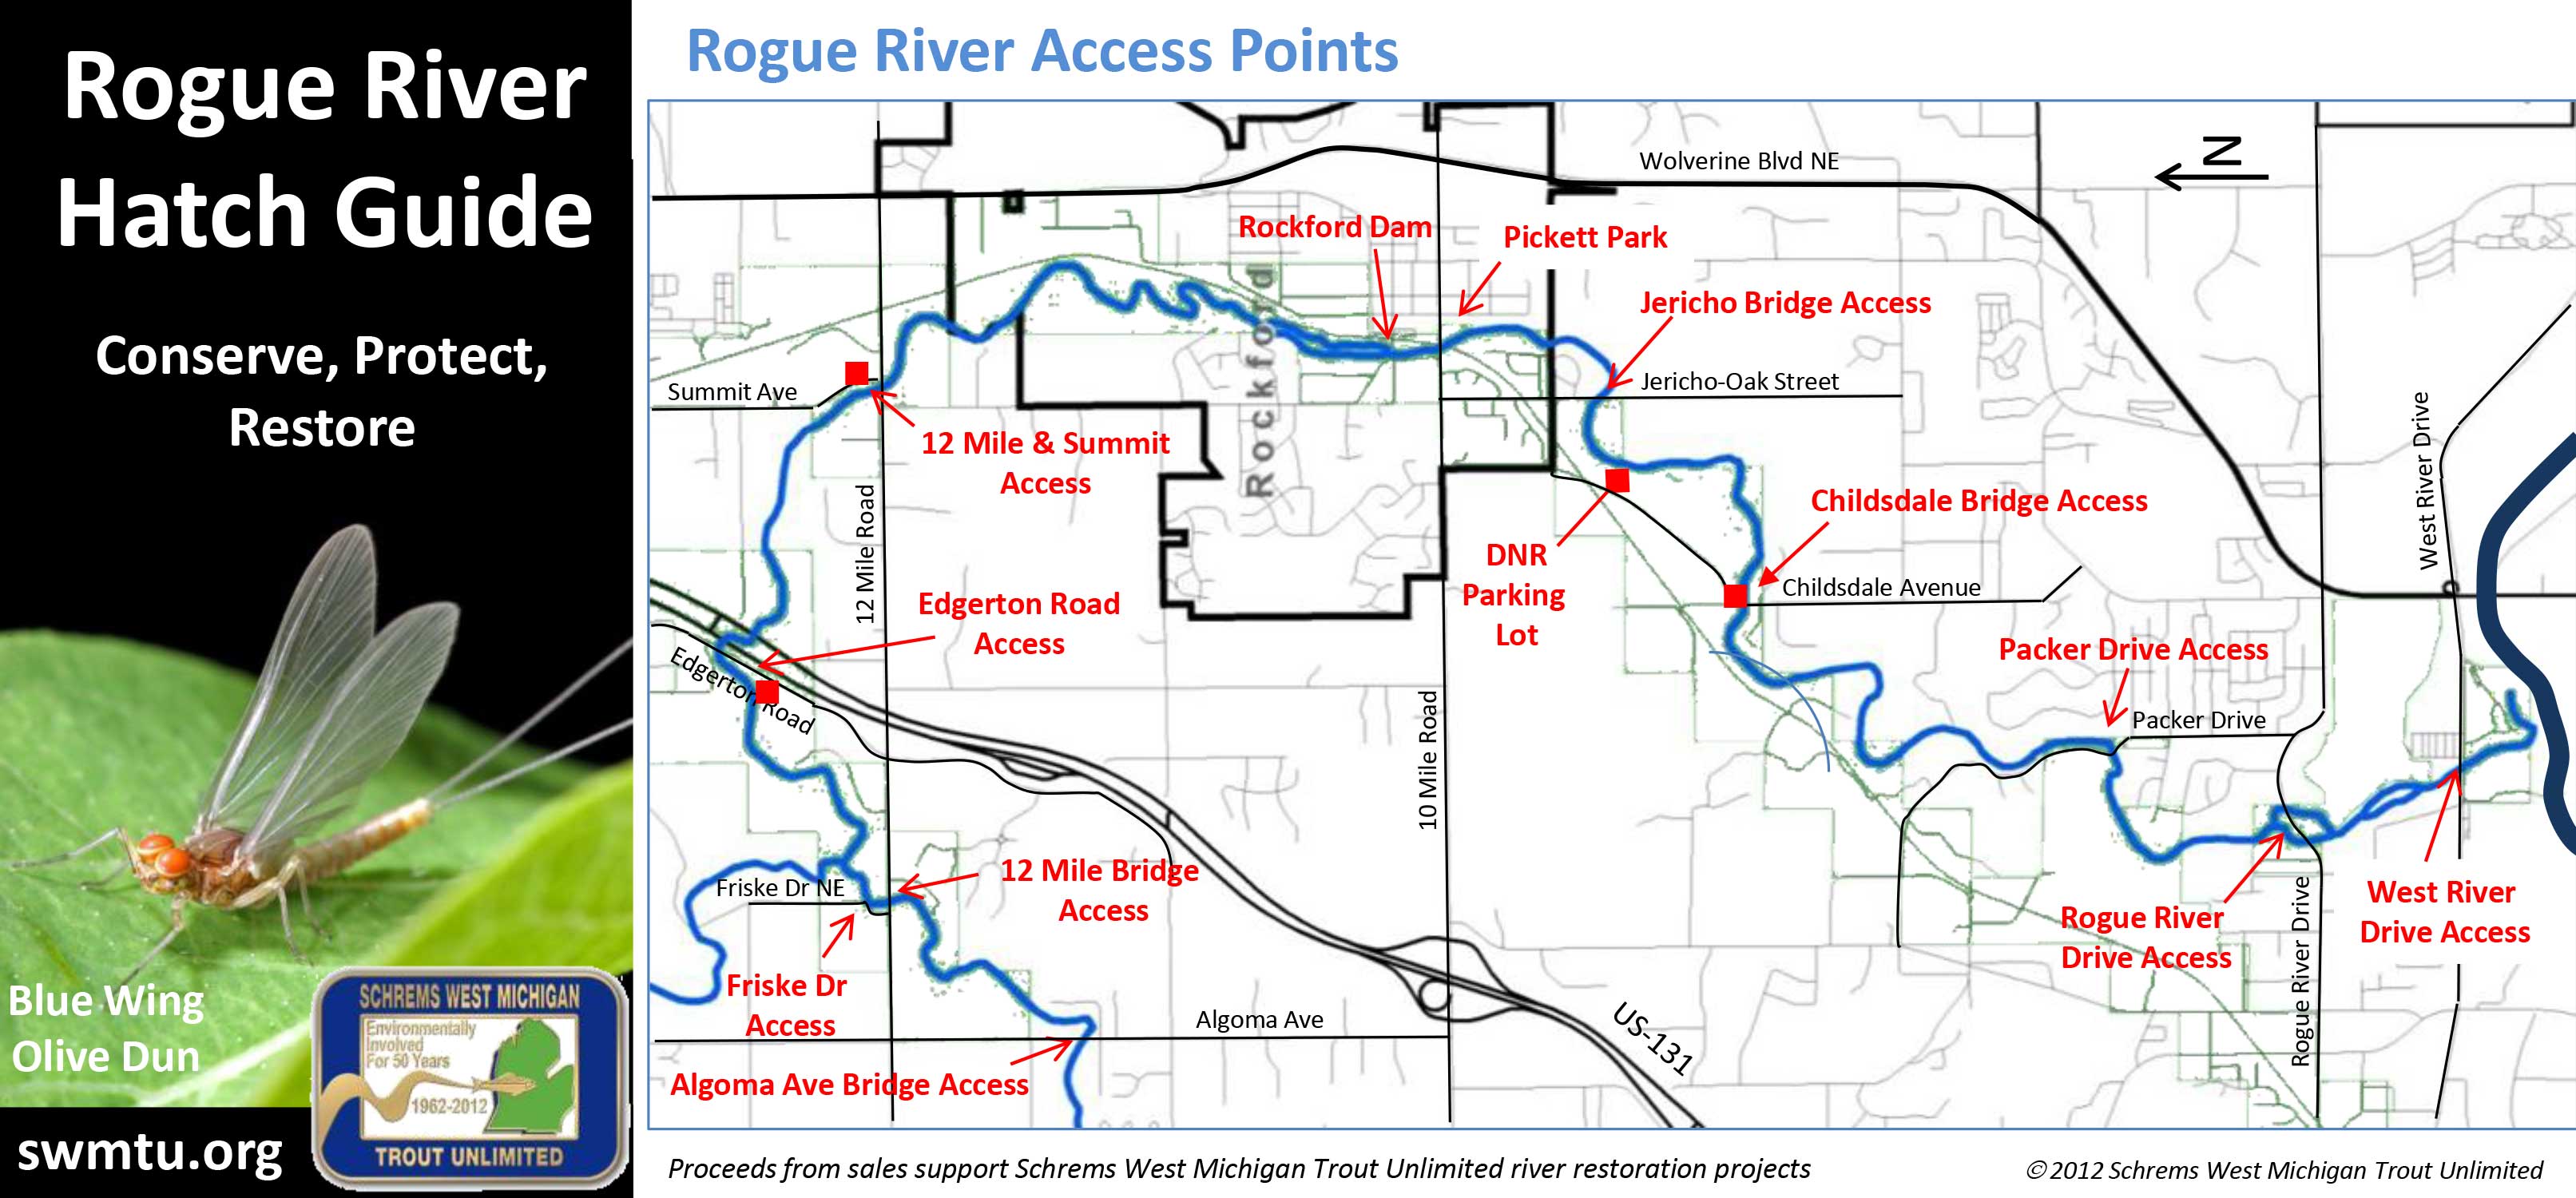 Rogue River Map and Hatch Guide